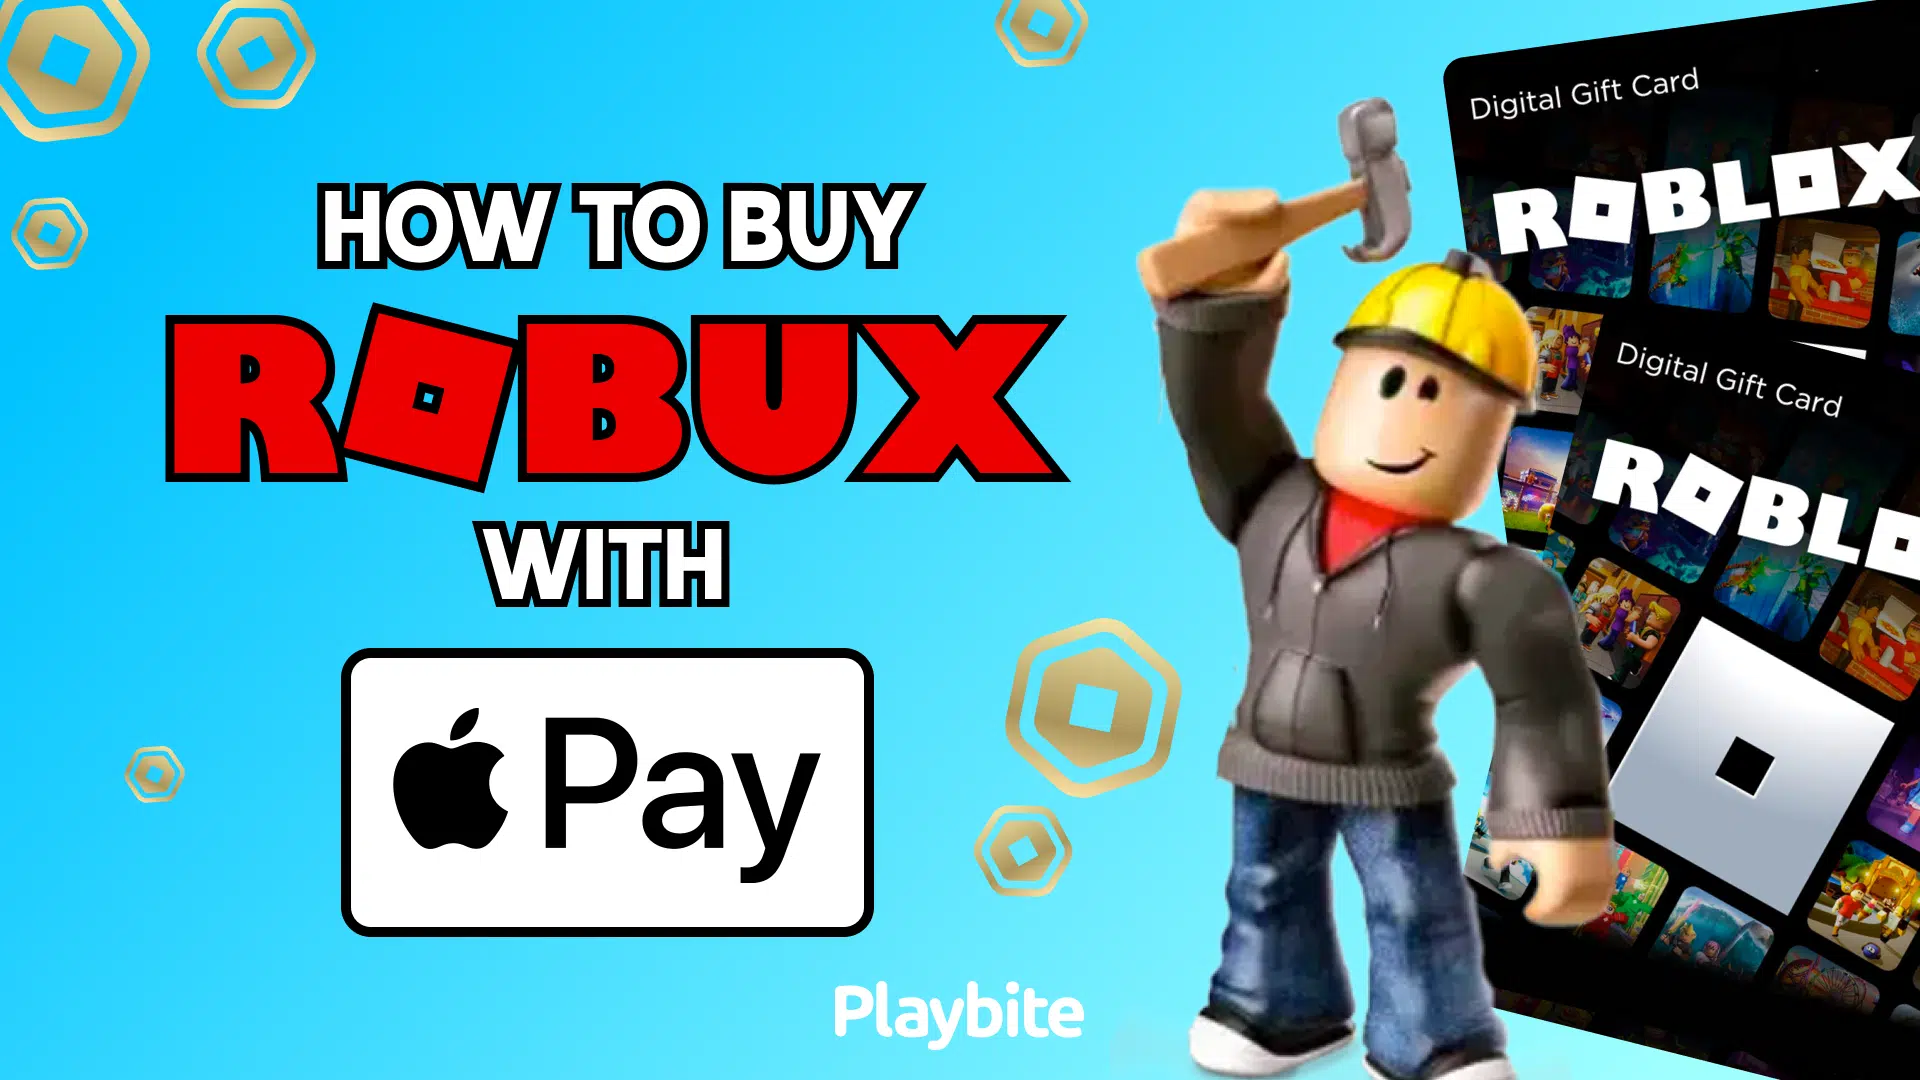 A Roblox Game Gifts & Merchandise for Sale